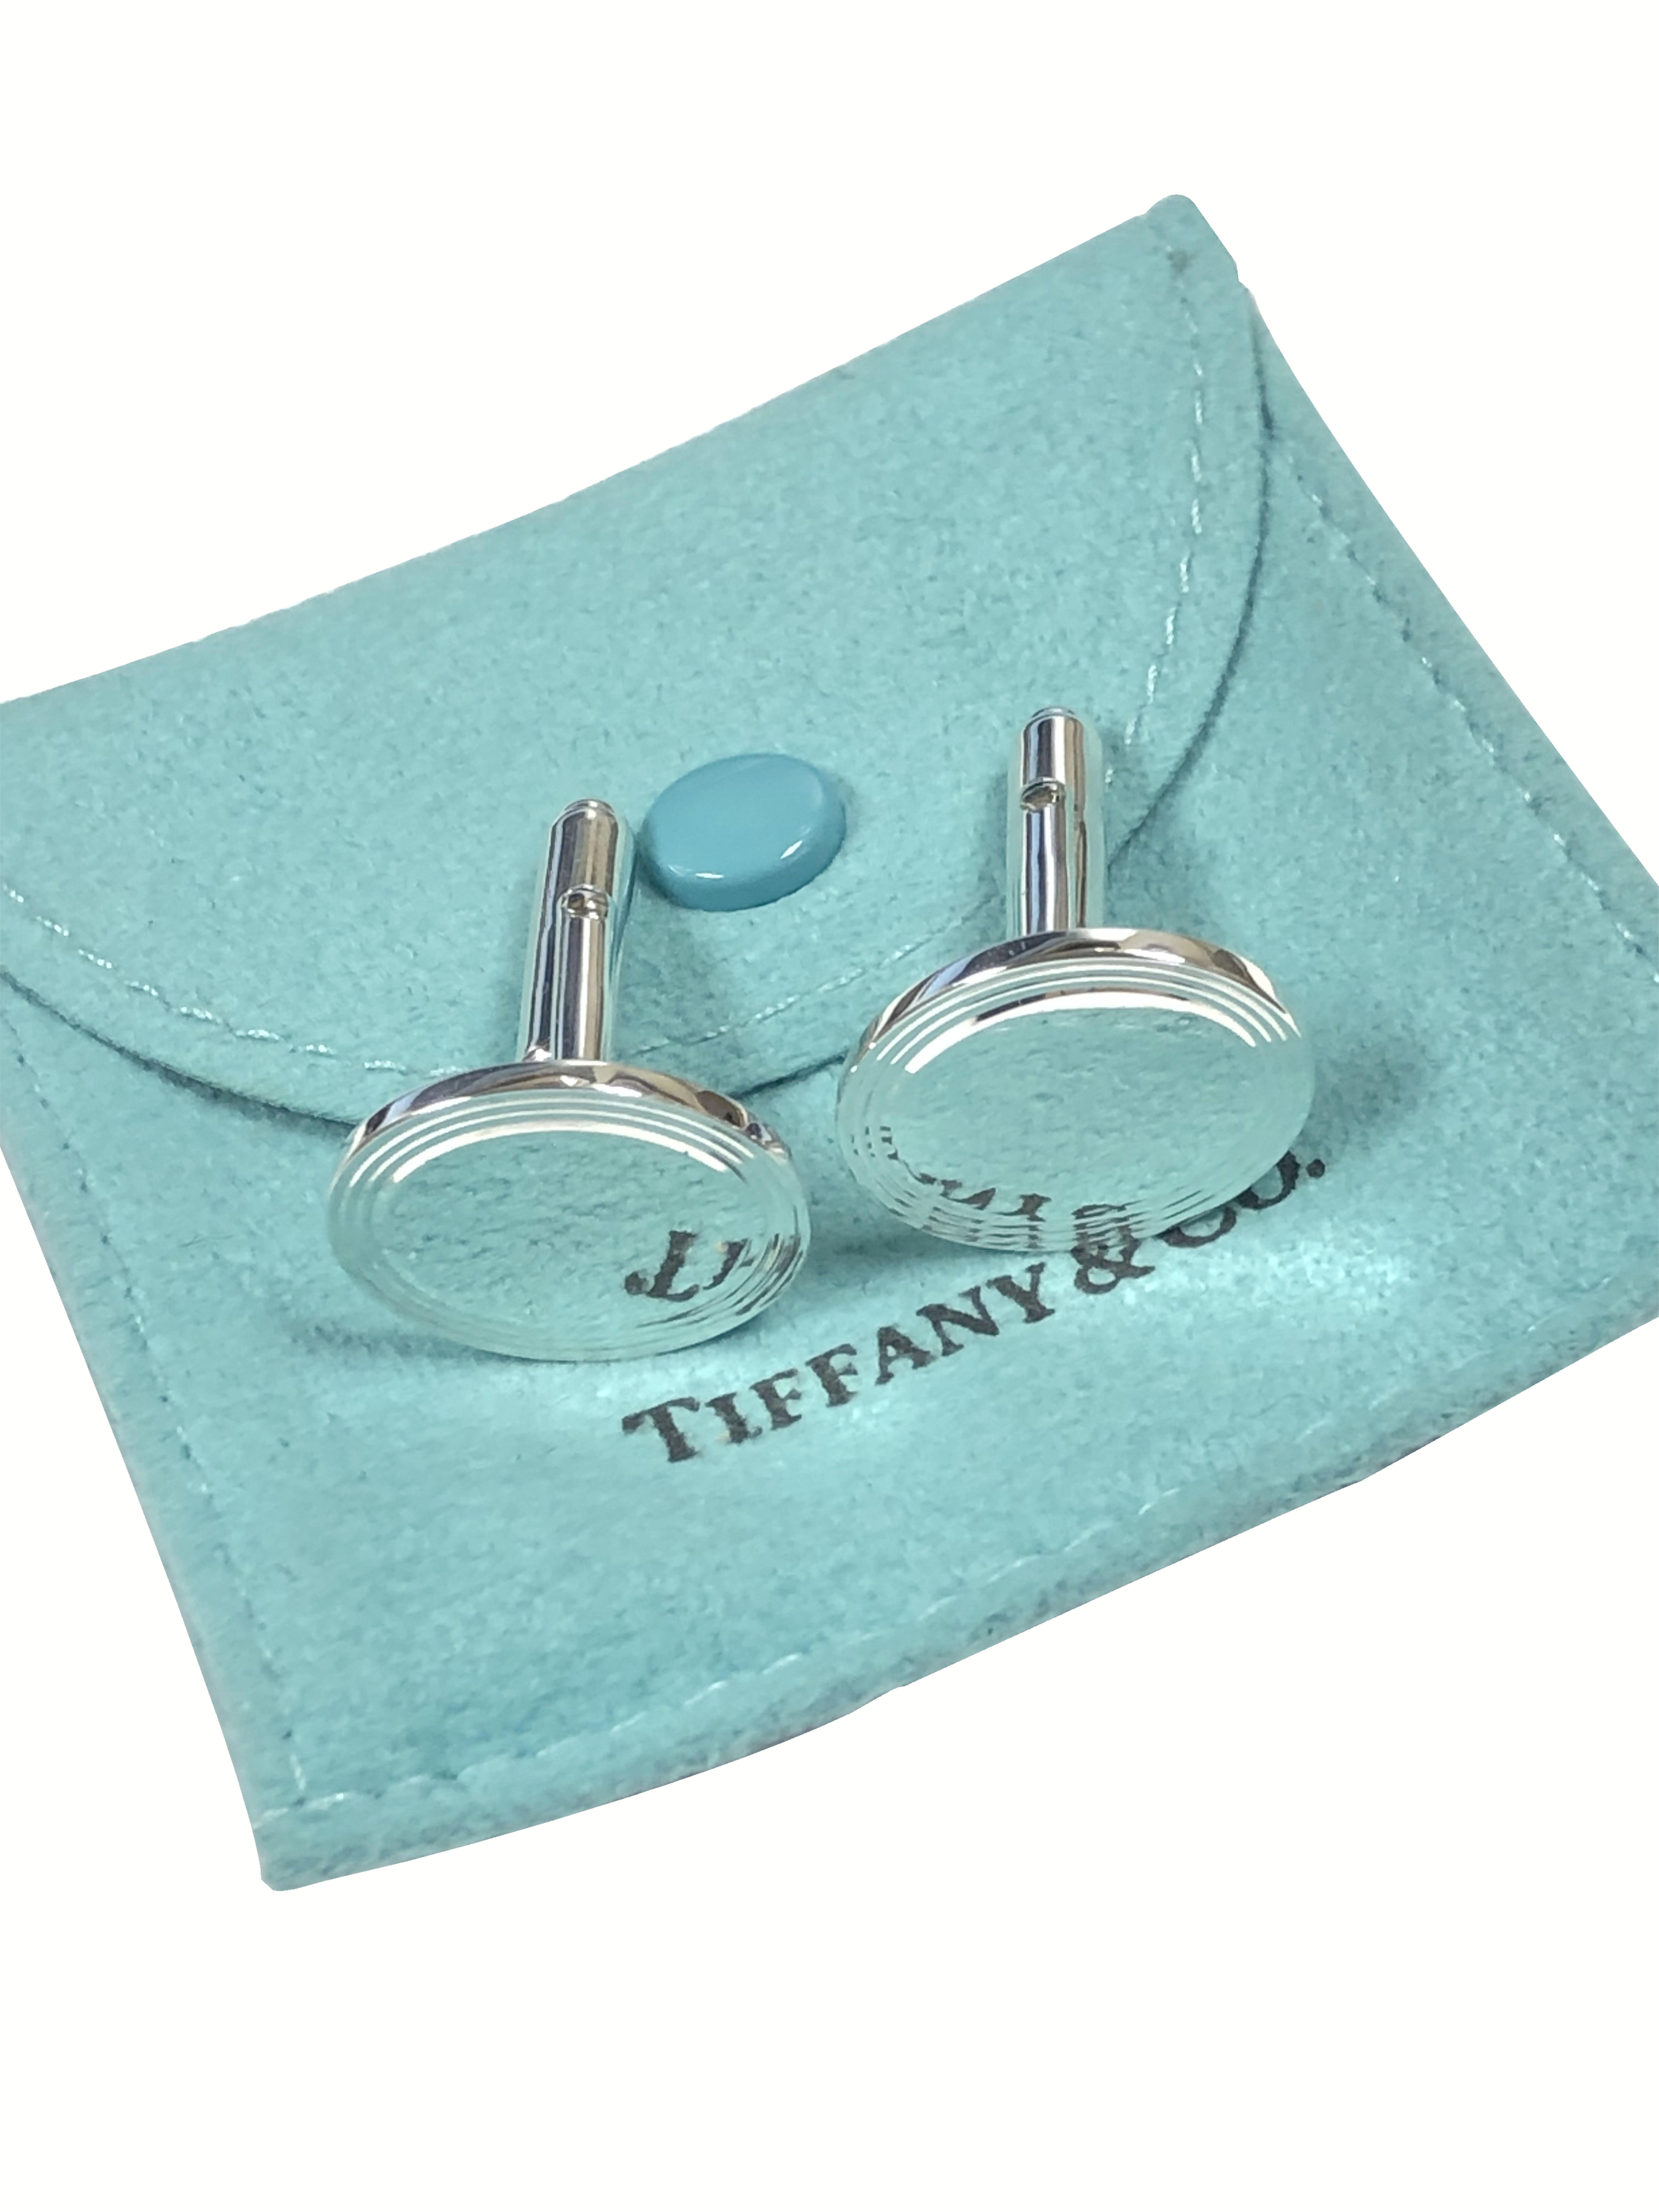 Circa 2018 Tiffany & Company Sterling Silver Oval Cufflinks, the tops measure 3/4 X 5/8 inch, engraved rings around a center for engraving names or initials. Toggle backs for easy on and off. These are new, never worn and come in a Tiffany Suede